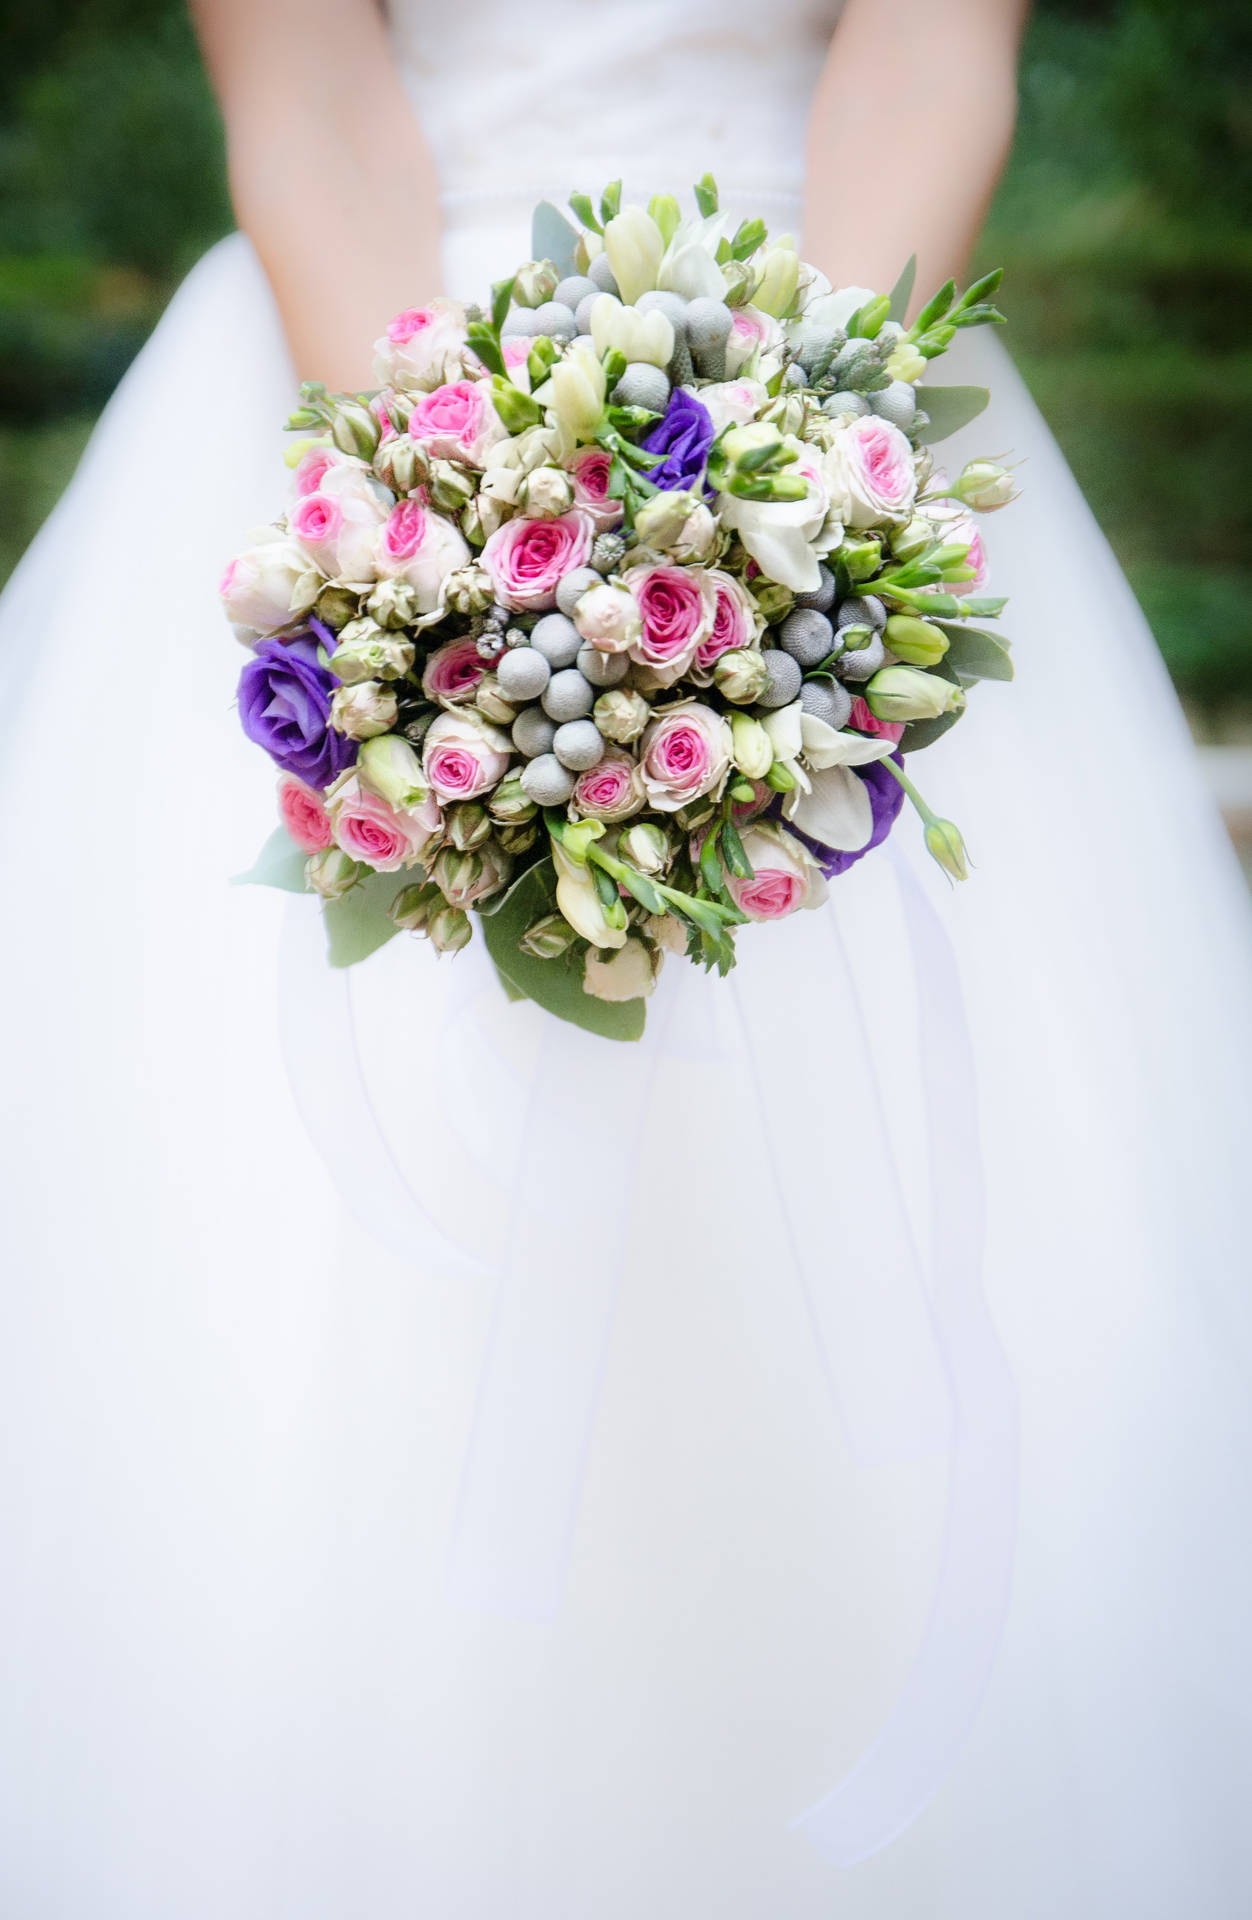 Wedding Dress And Bridal Bouquet Background